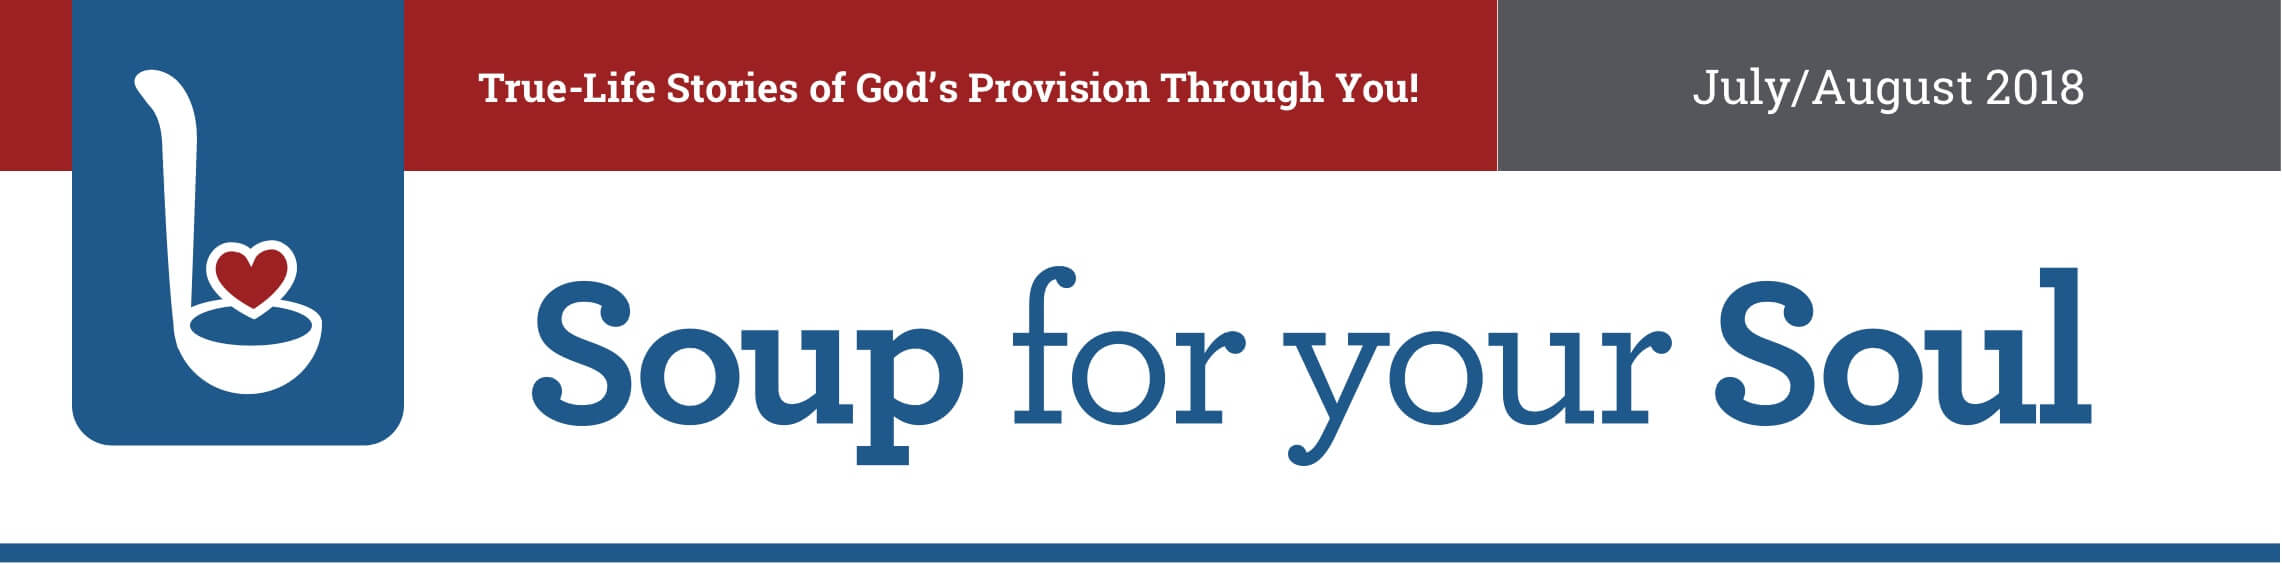 True-Life Stories of God’s Provision Through You! May/June 2018. Soup for your Soul